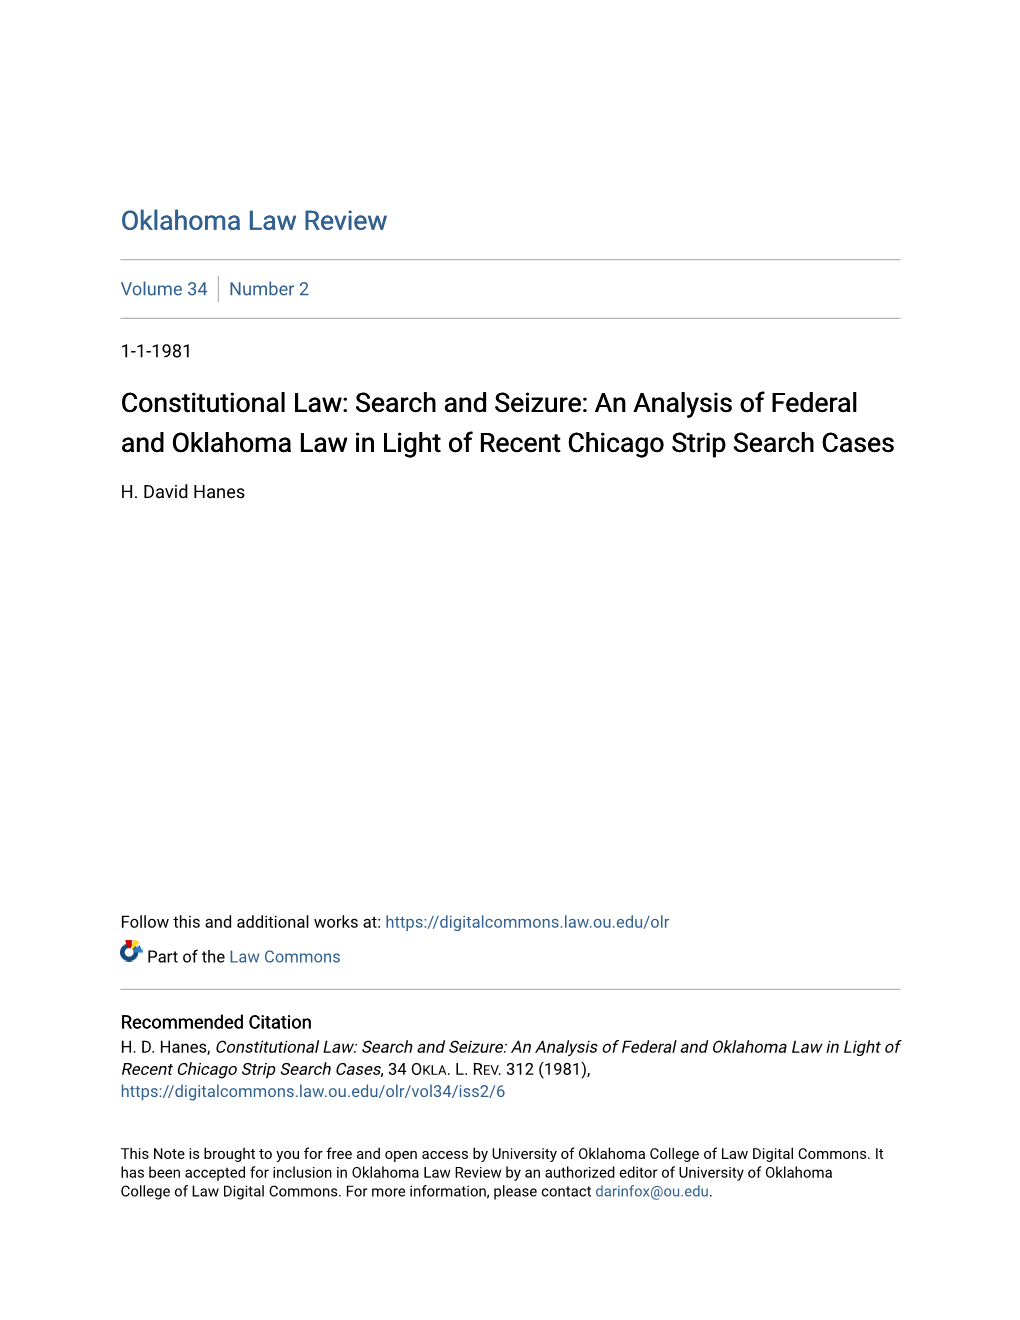 Search and Seizure: an Analysis of Federal and Oklahoma Law in Light of Recent Chicago Strip Search Cases